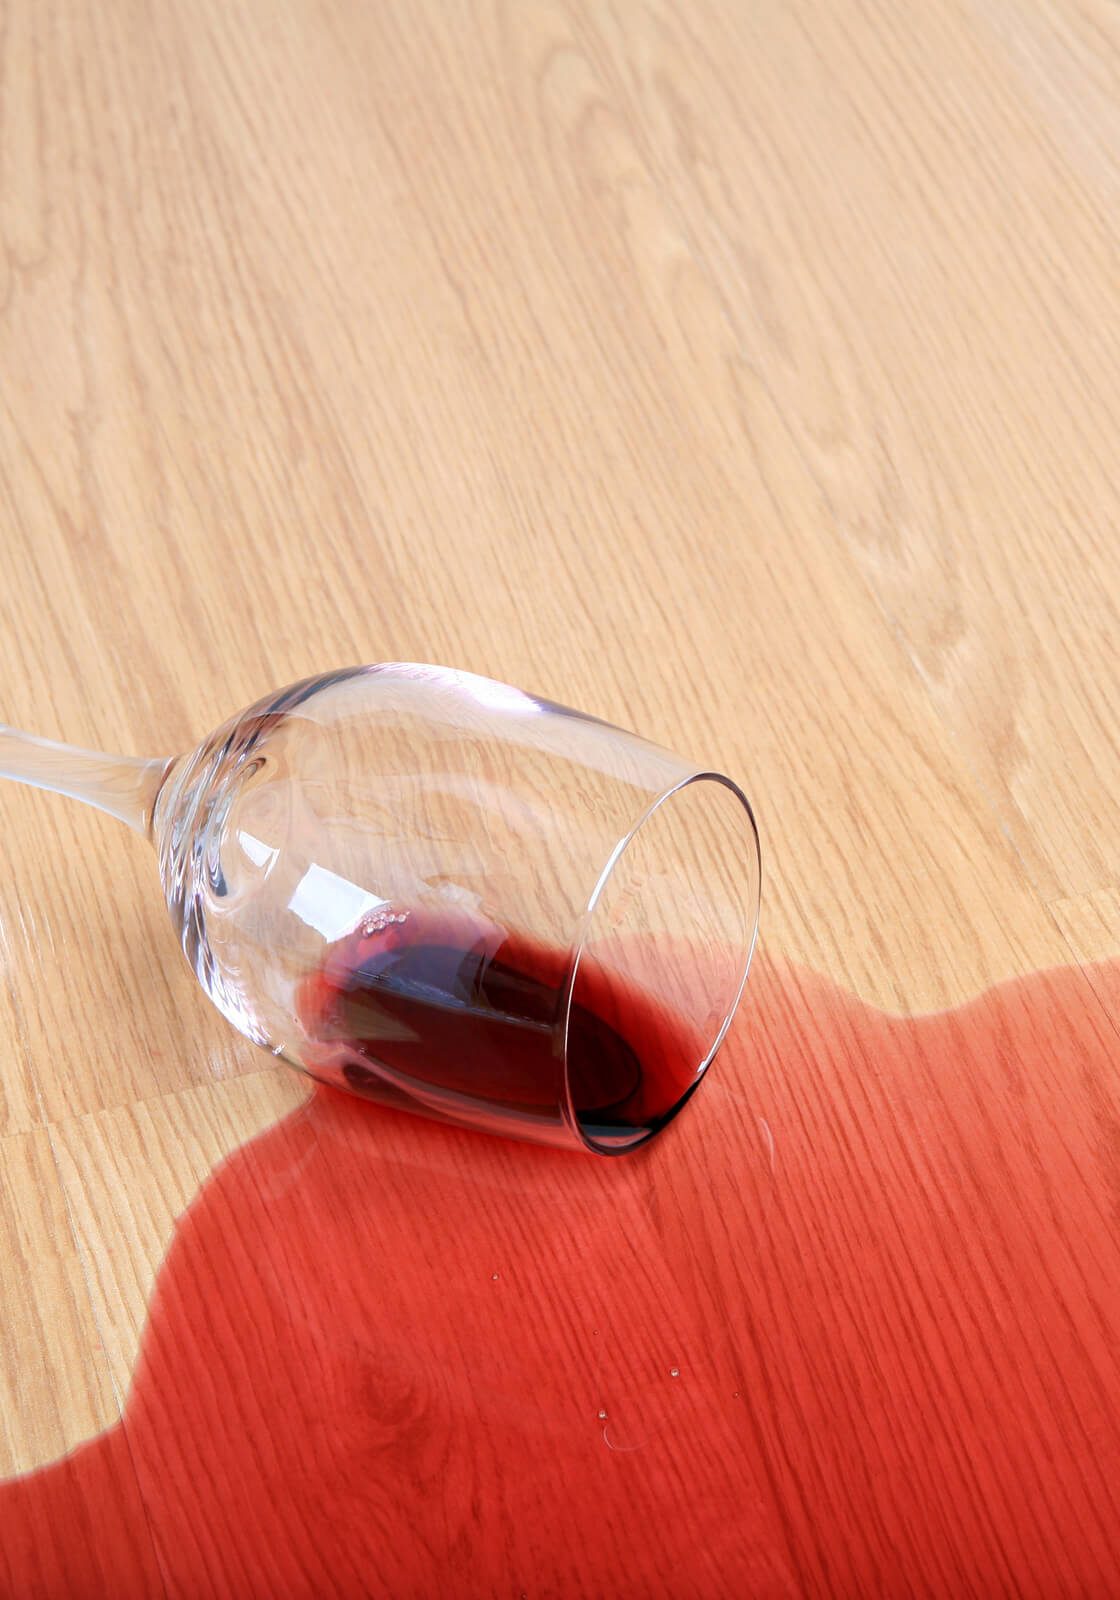 Red wine spill cleaning on laminate flooring | All Floors & More